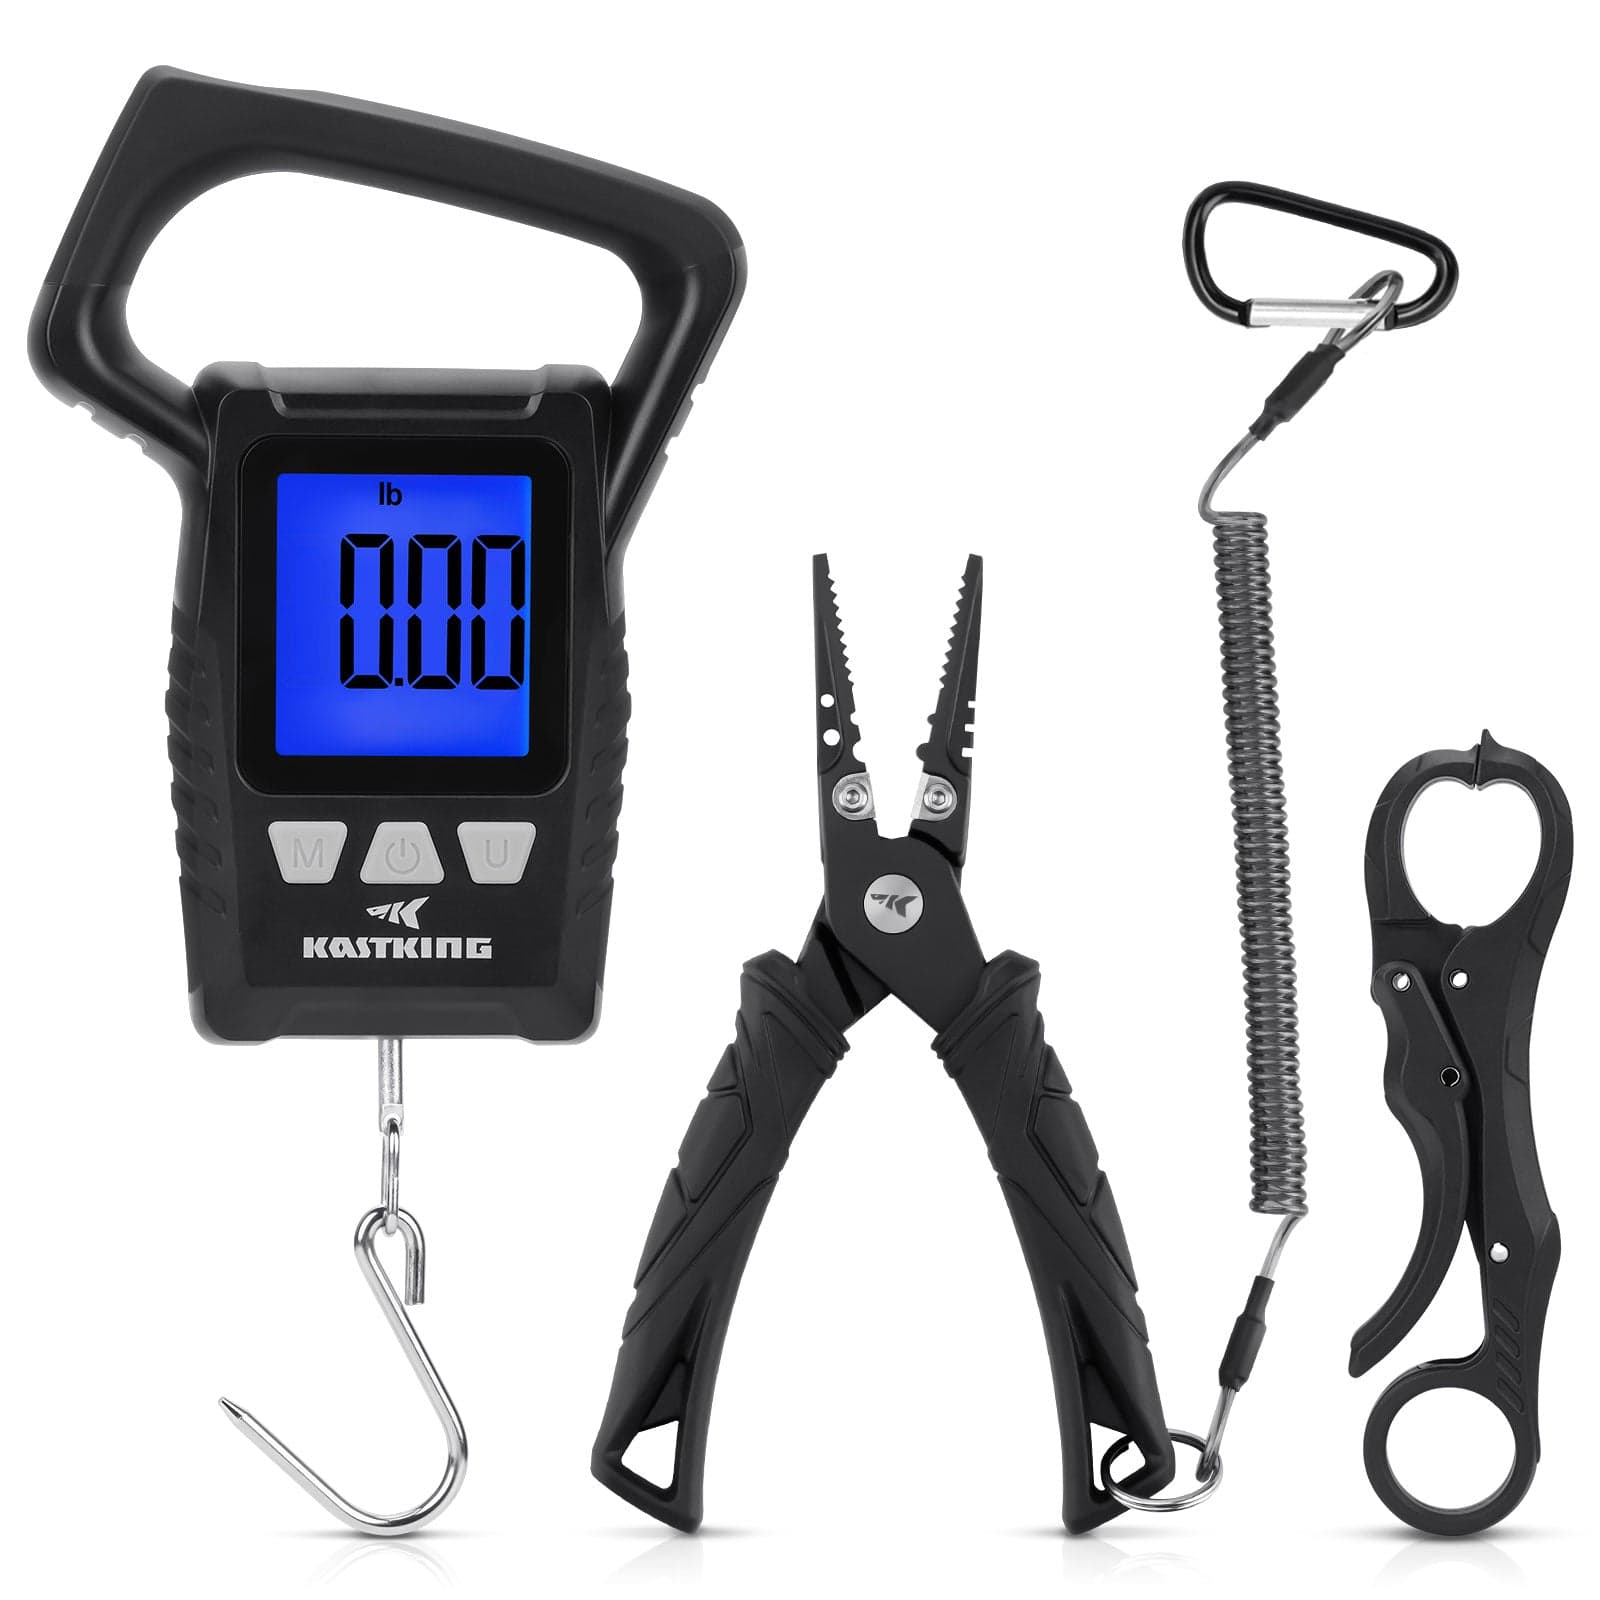 KastKing WideView Digital Scale and Pliers Combo